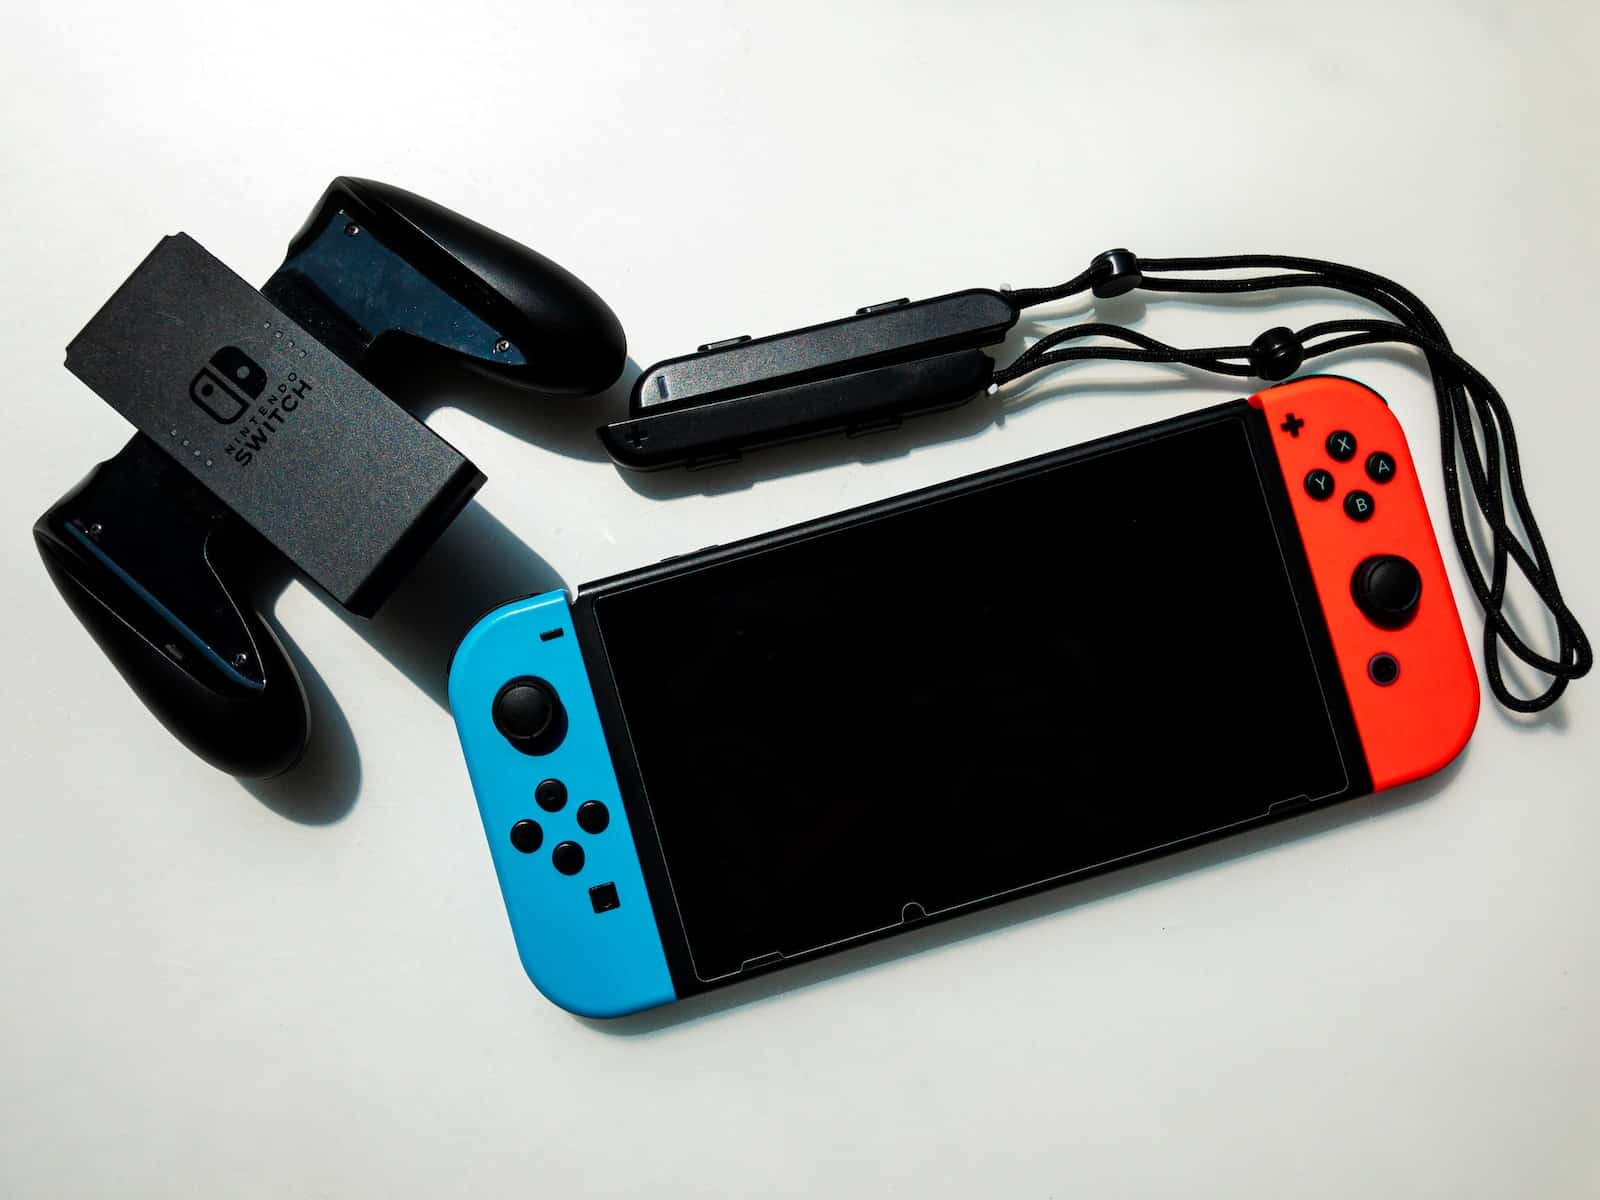 Battery Life and Charging Time of NEW Nintendo Switch V2 versus